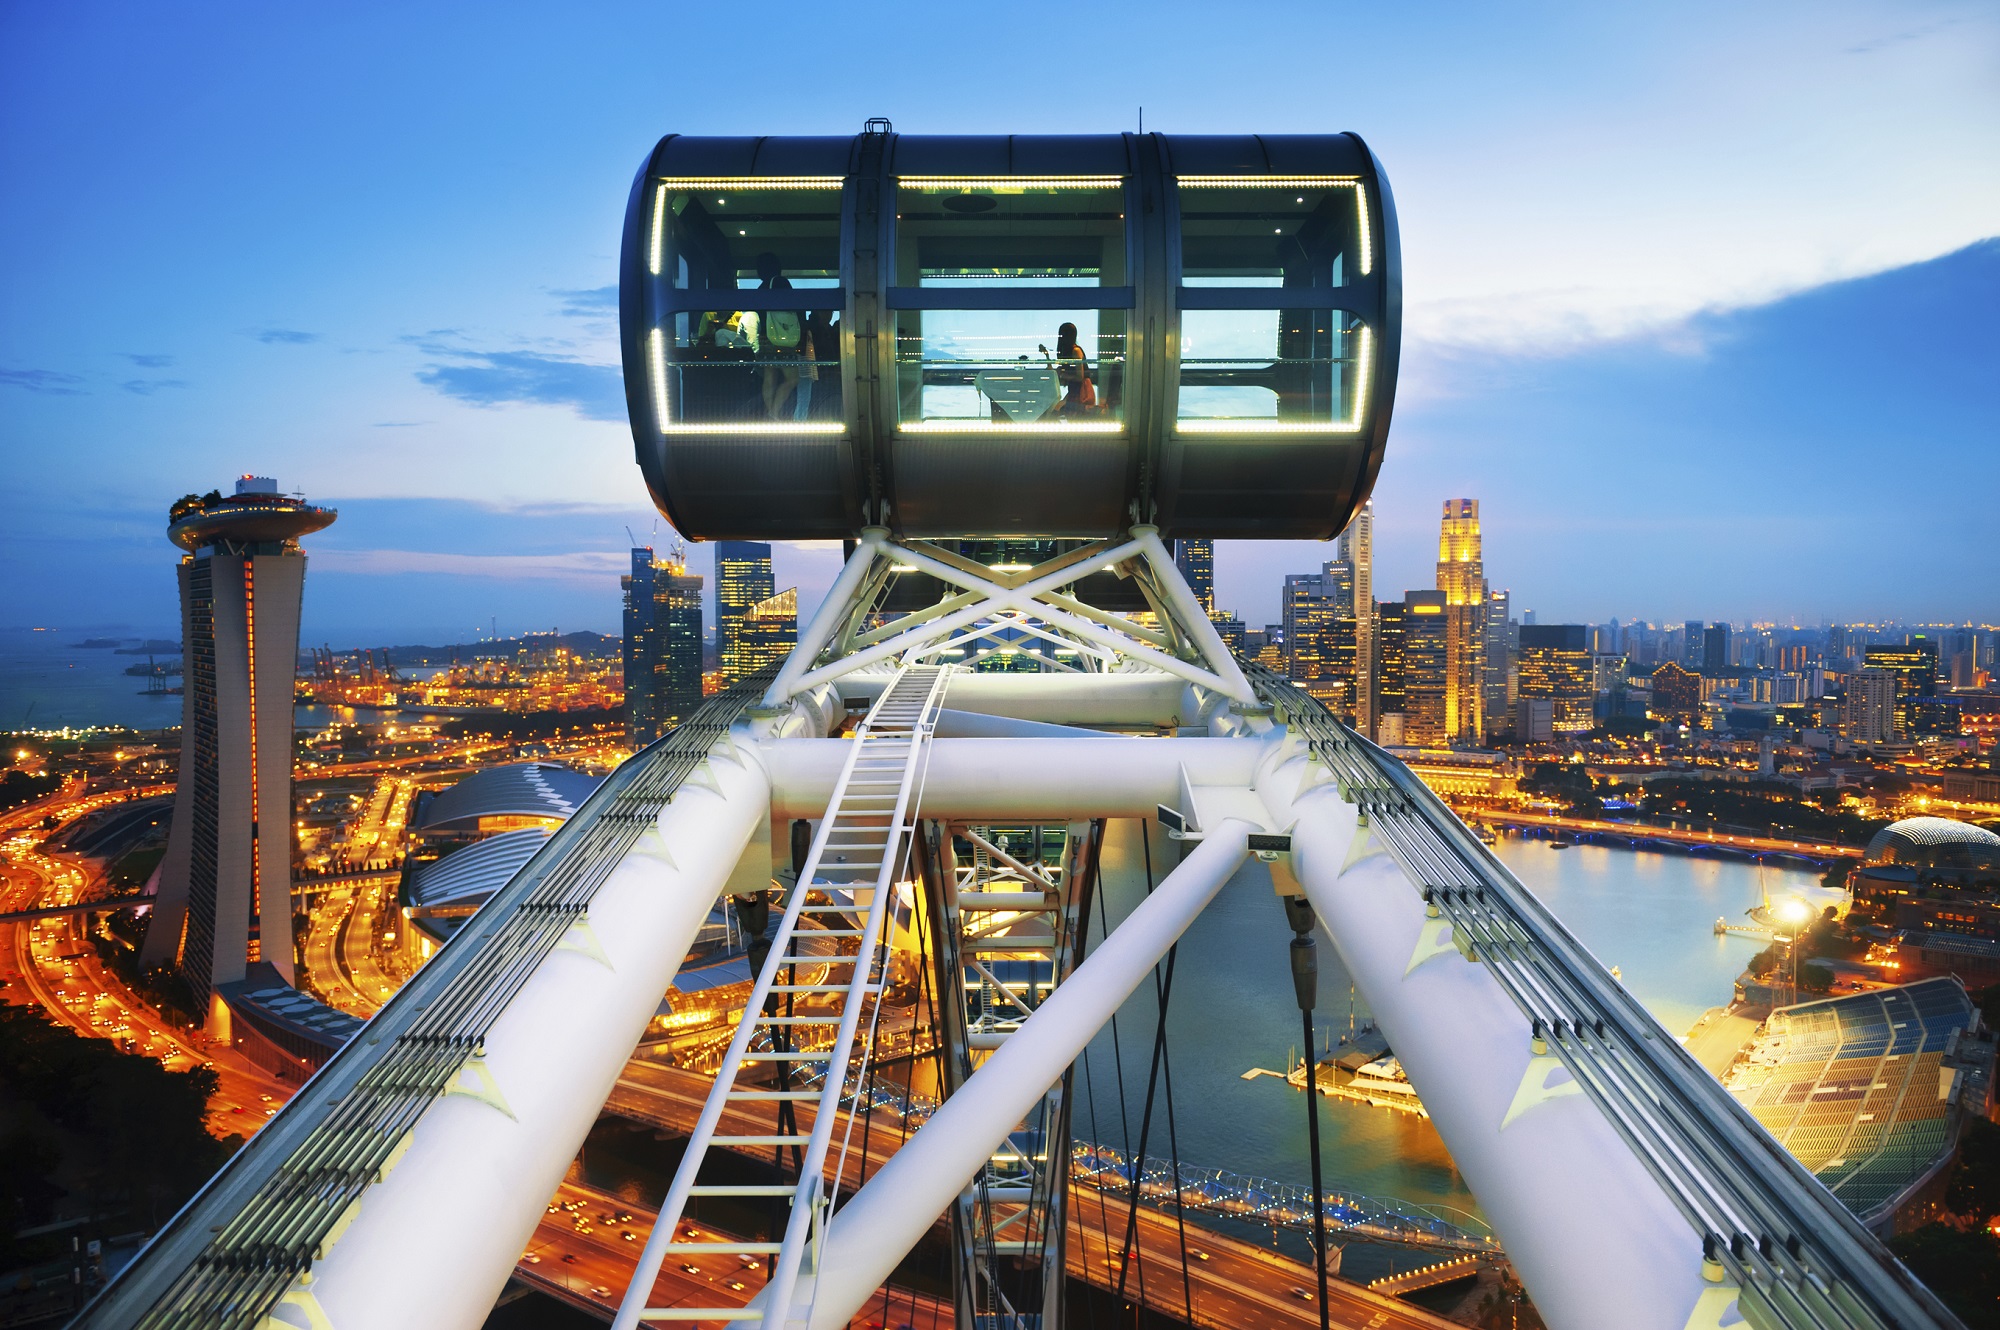 A tourist favourite: the spectacular Singapore skyline from the iconic Singapore Flyer